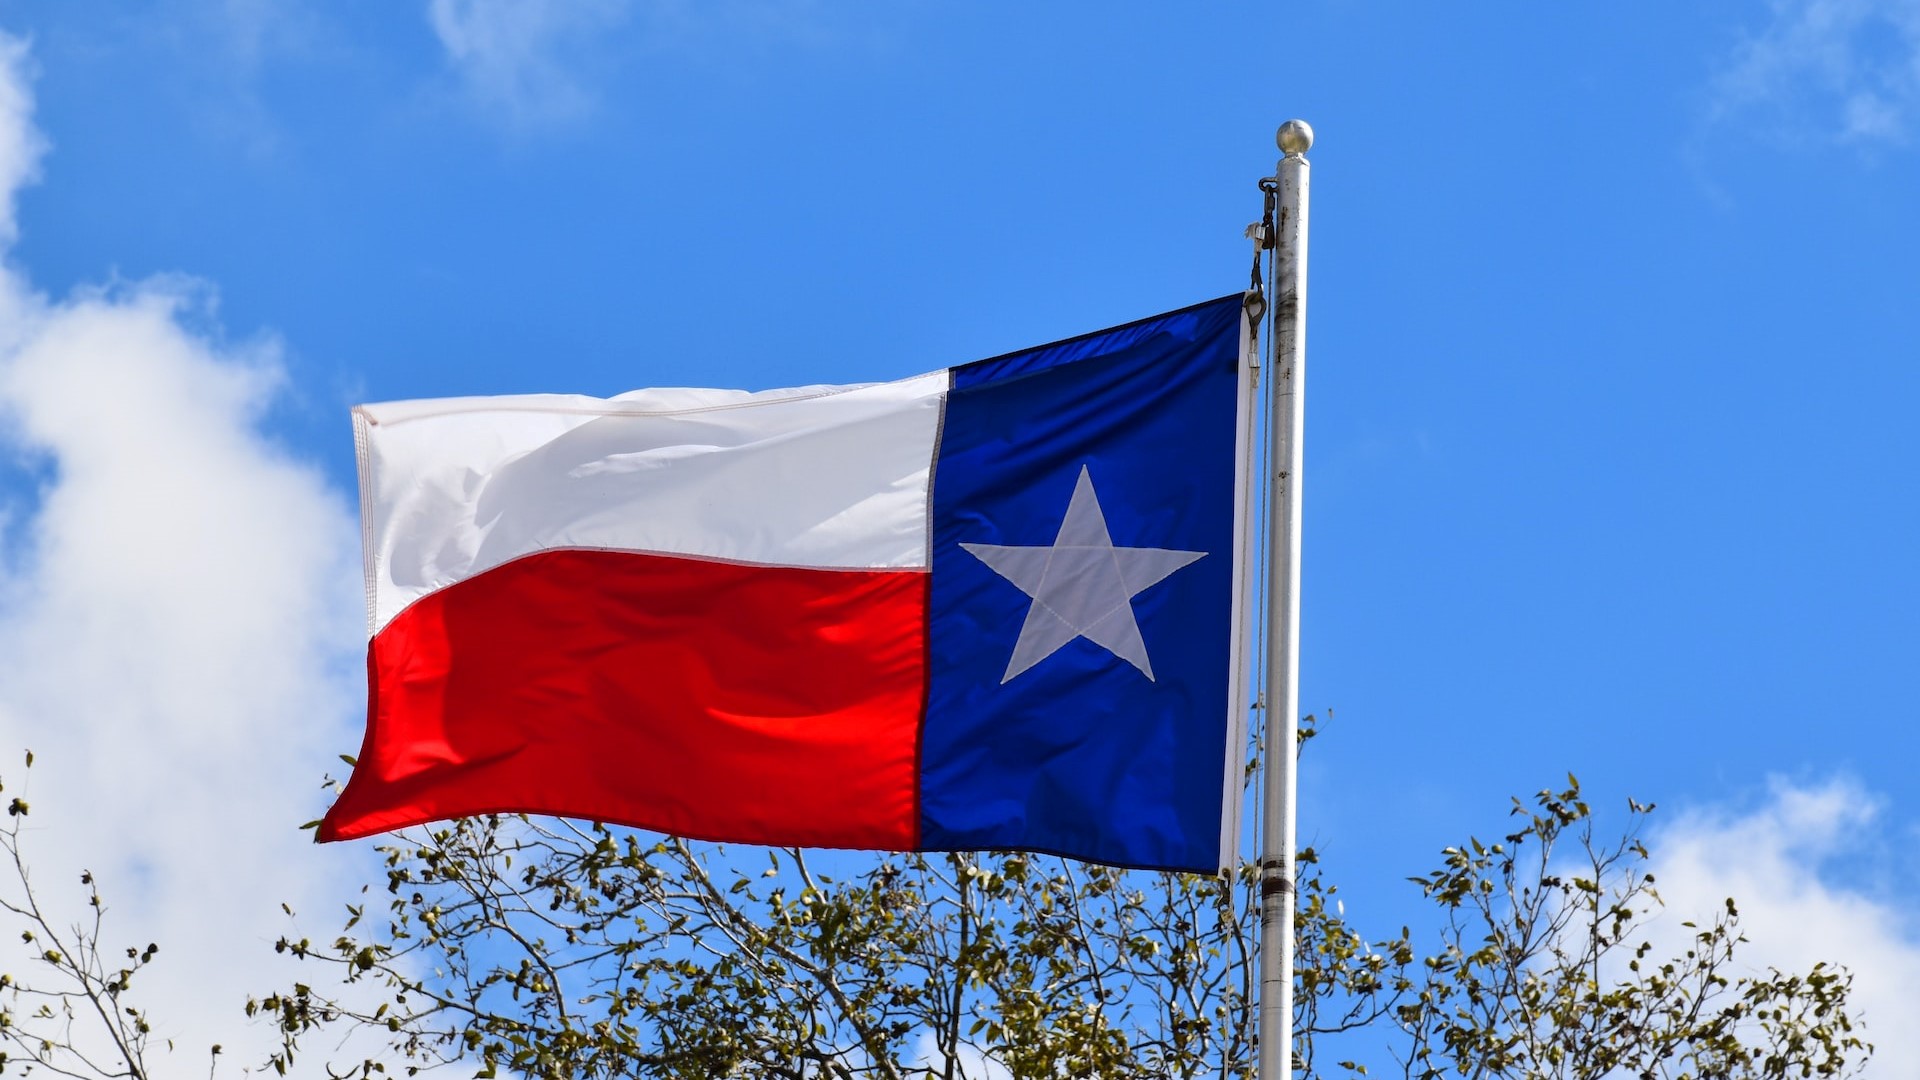 Texas the Lone Star State - flag blowing in the wind | Goodwill Car Donations